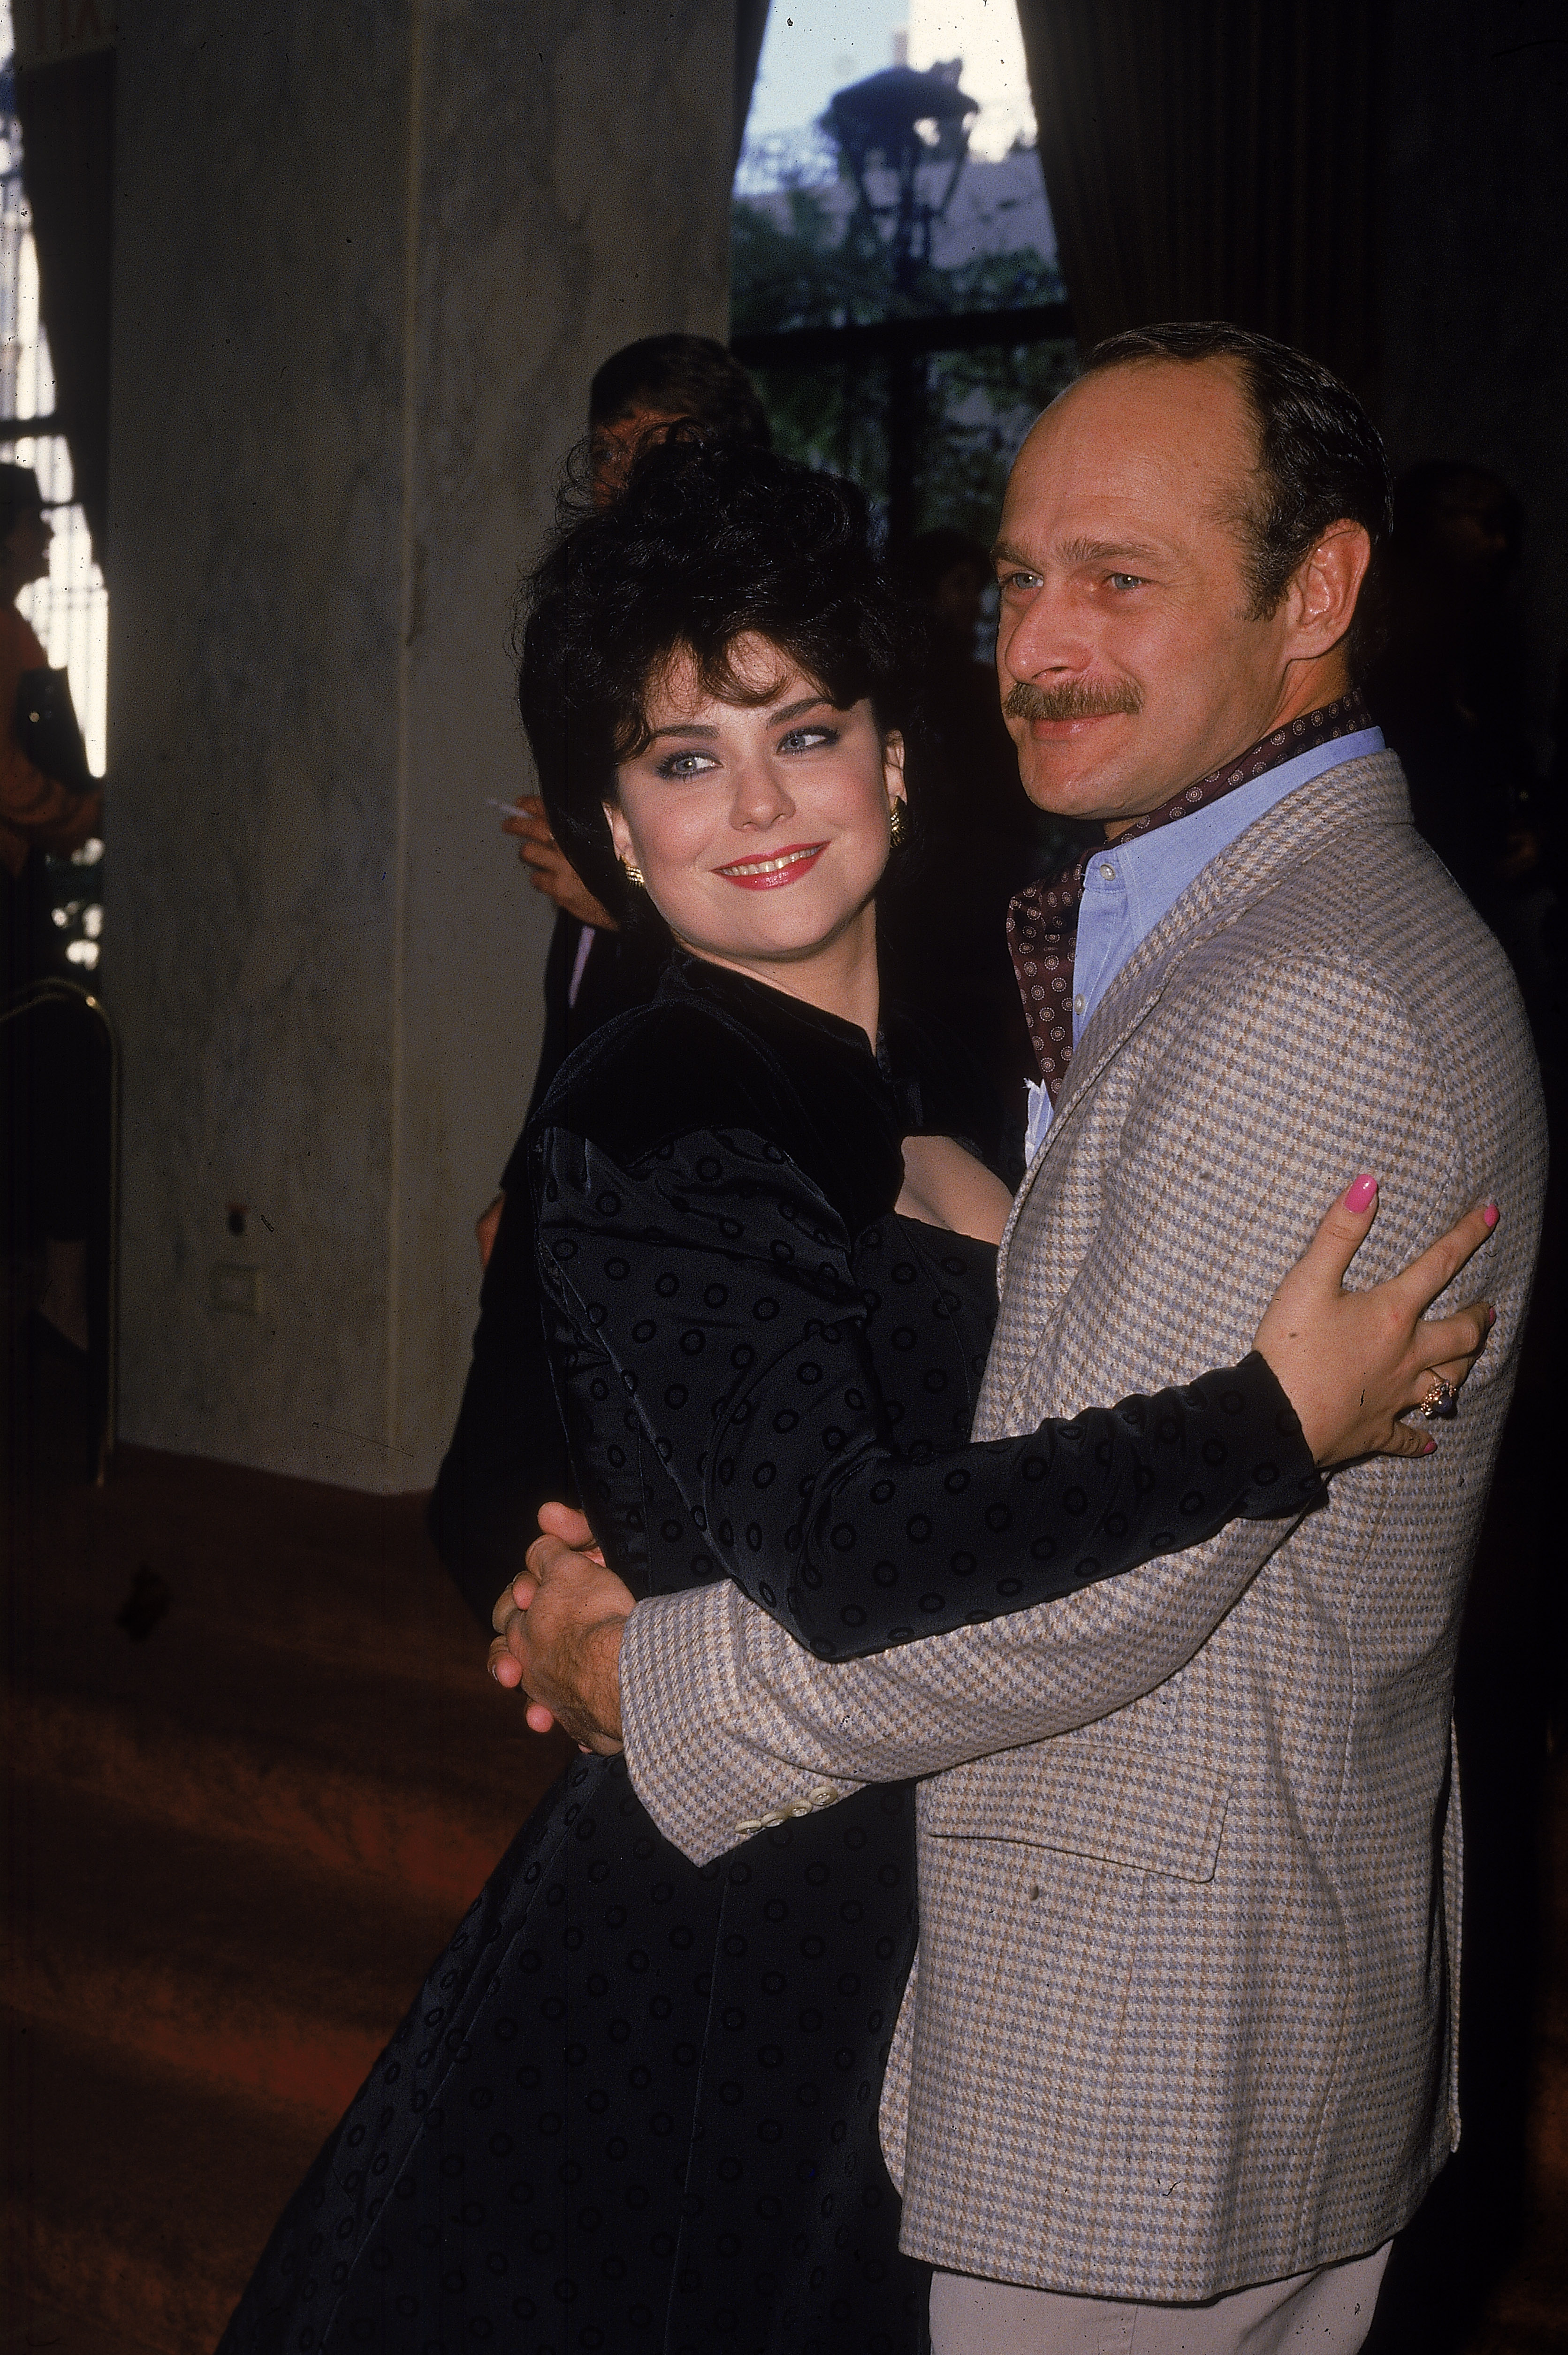 American actors Delta Burke and Gerald McRaney pose hugging as they arrive at the Golden Apple Awards, held at the Beverly Wilshire Hotel, Beverly Hills, California, December 13, 1987. | Source: Getty Images